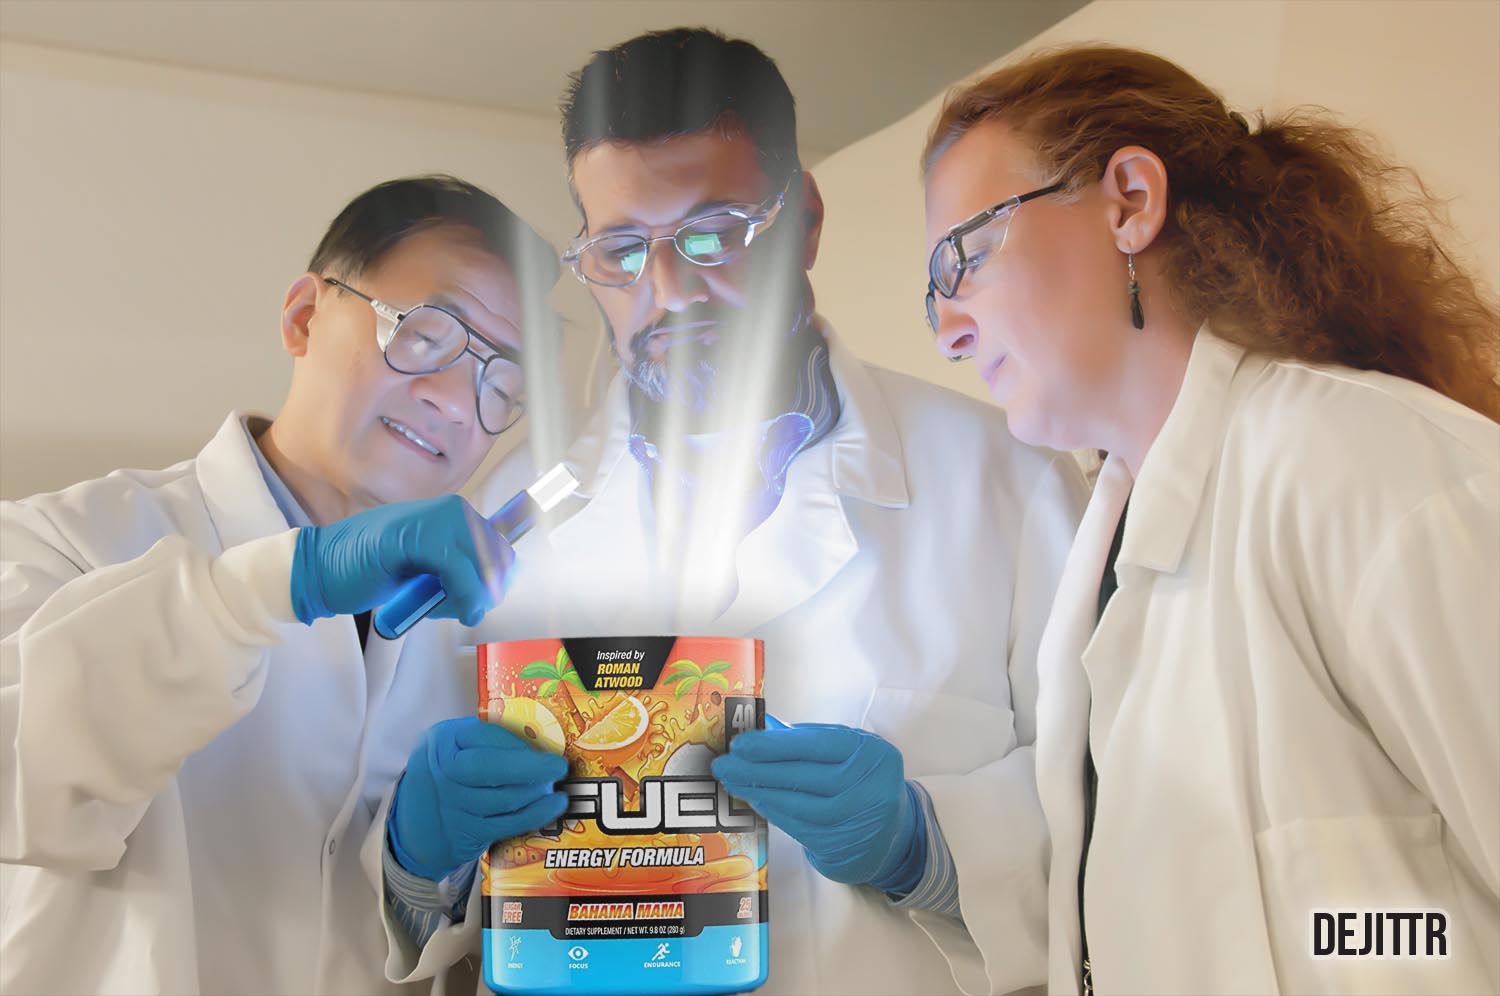 https://dejittr.com/wp-content/uploads/2022/05/3-people-looking-into-glowing-tub-of-g-fuel.jpg